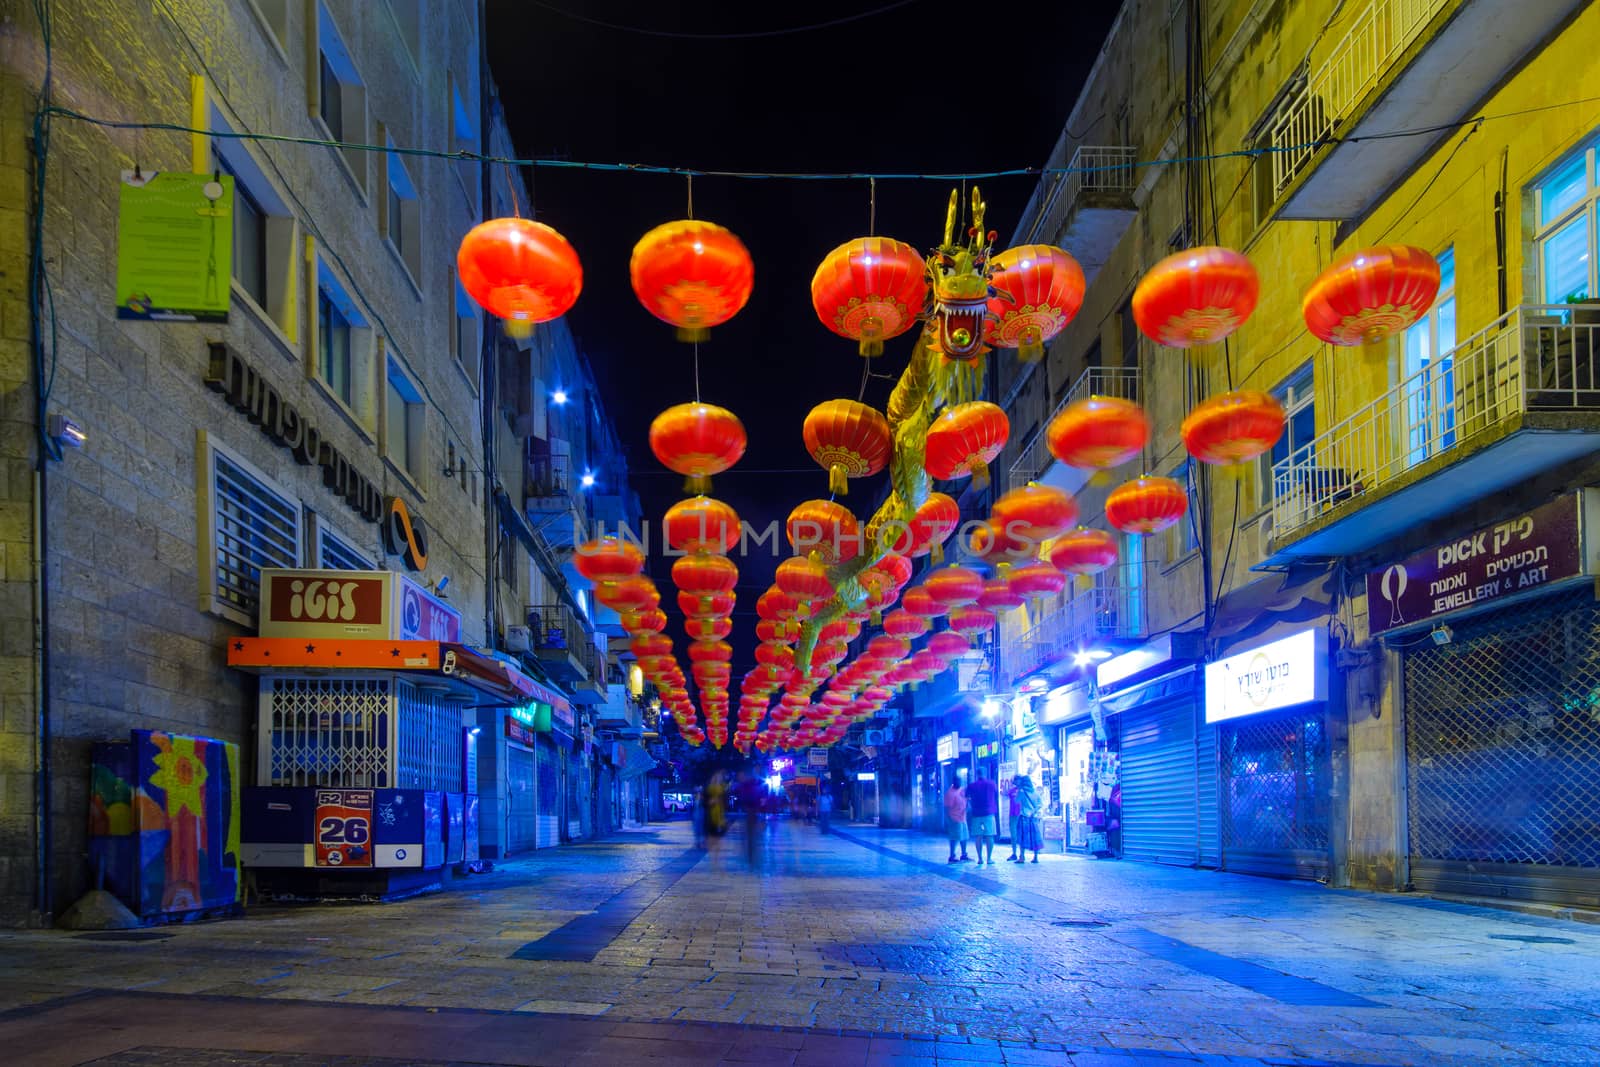 The Ben Hillel Street with Chinese style decorations, Jerusalem by RnDmS